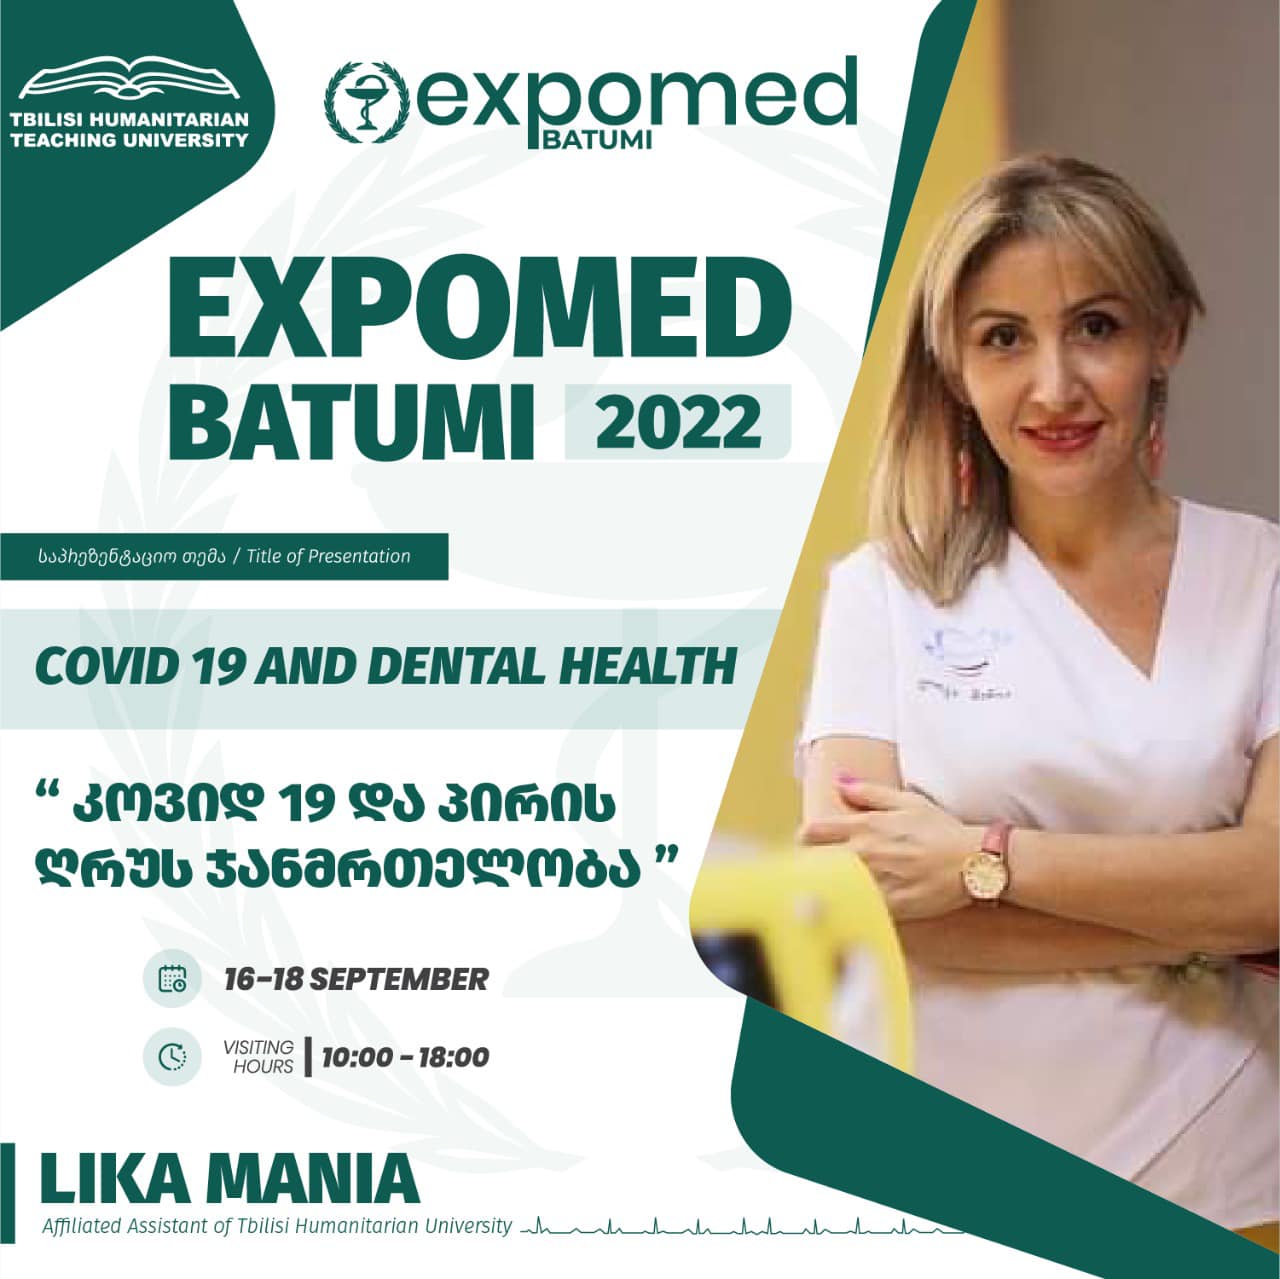 Expo Med Batumi 2022 - within the framework of the exhibition 